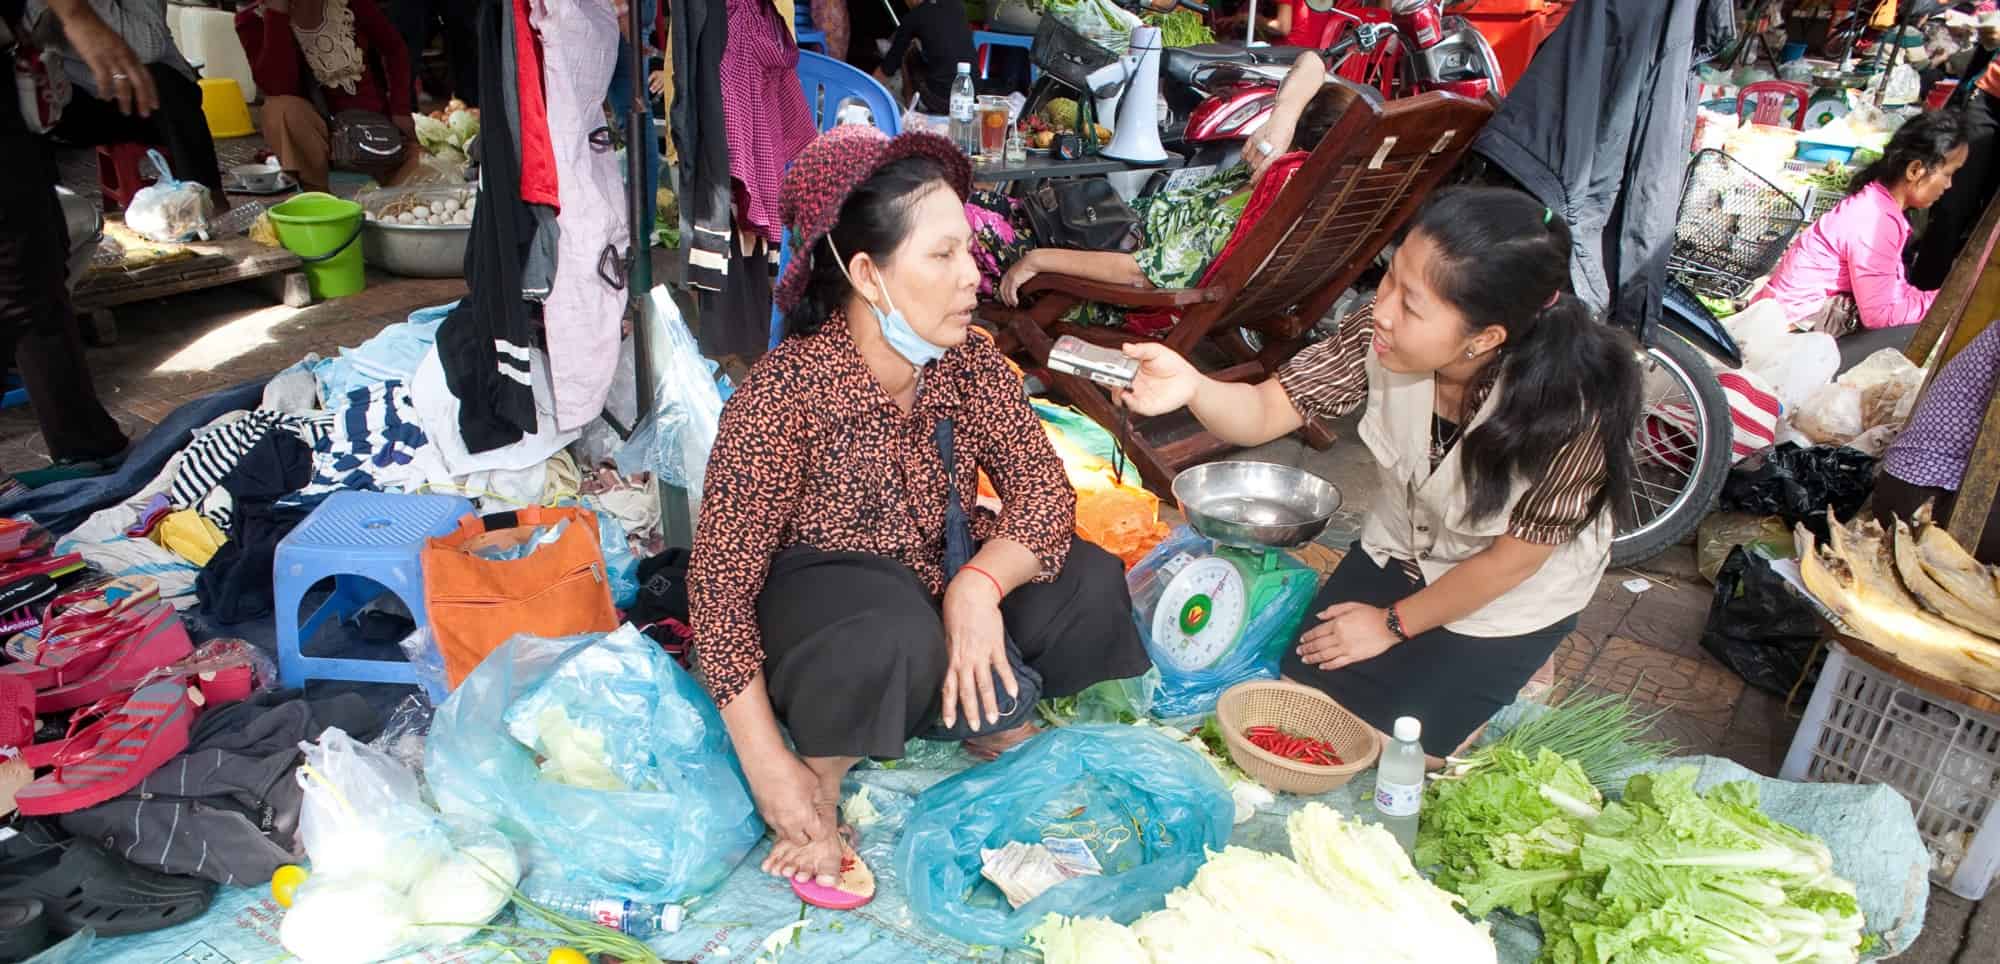 A journalist interviews a woman selling vegetables in a market.